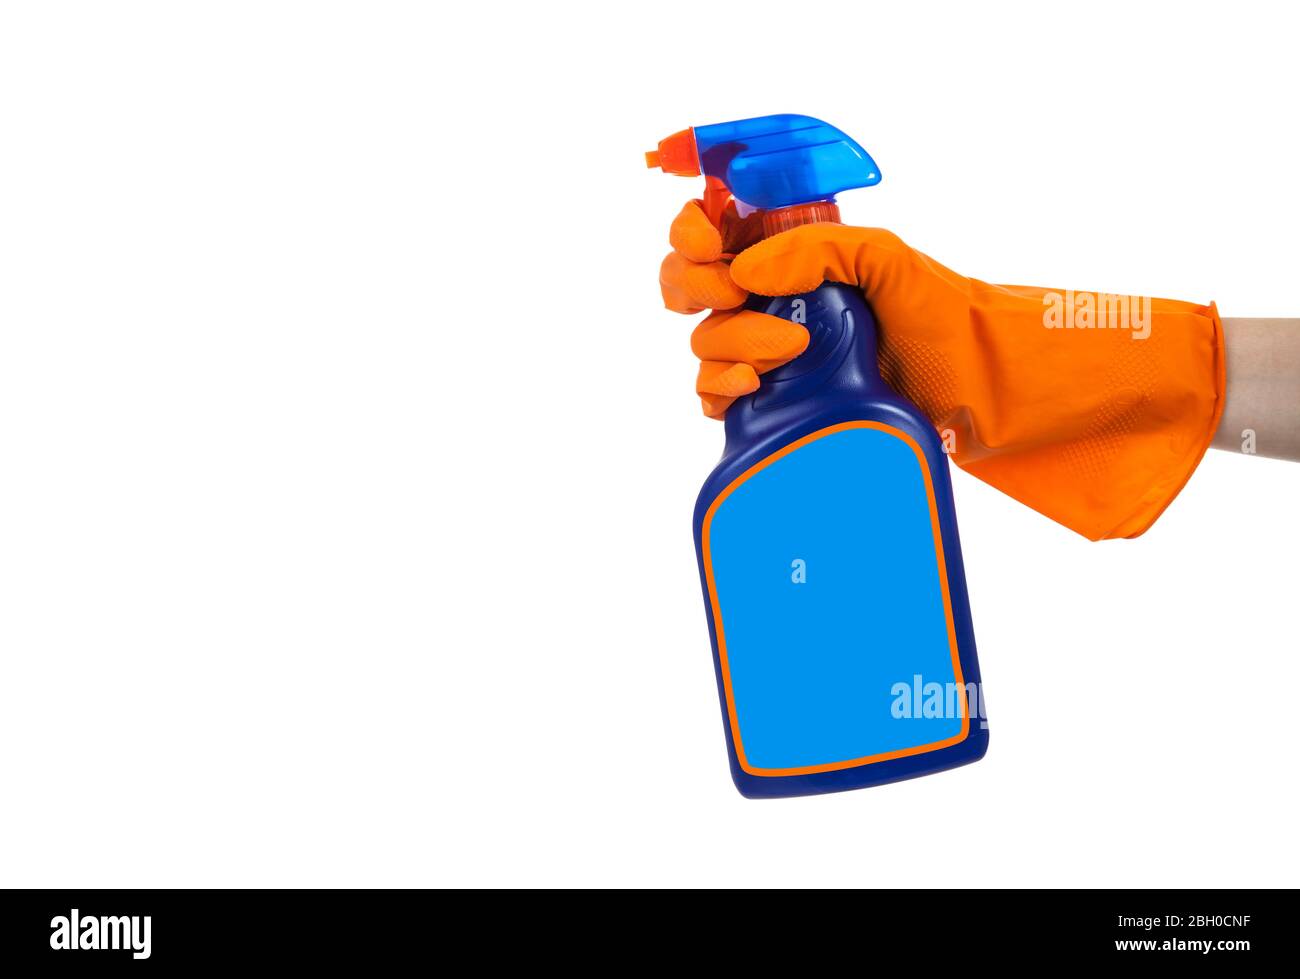 A gloved hands holding a spray bottle of cleaning, disinfecting chemical on a white background Stock Photo